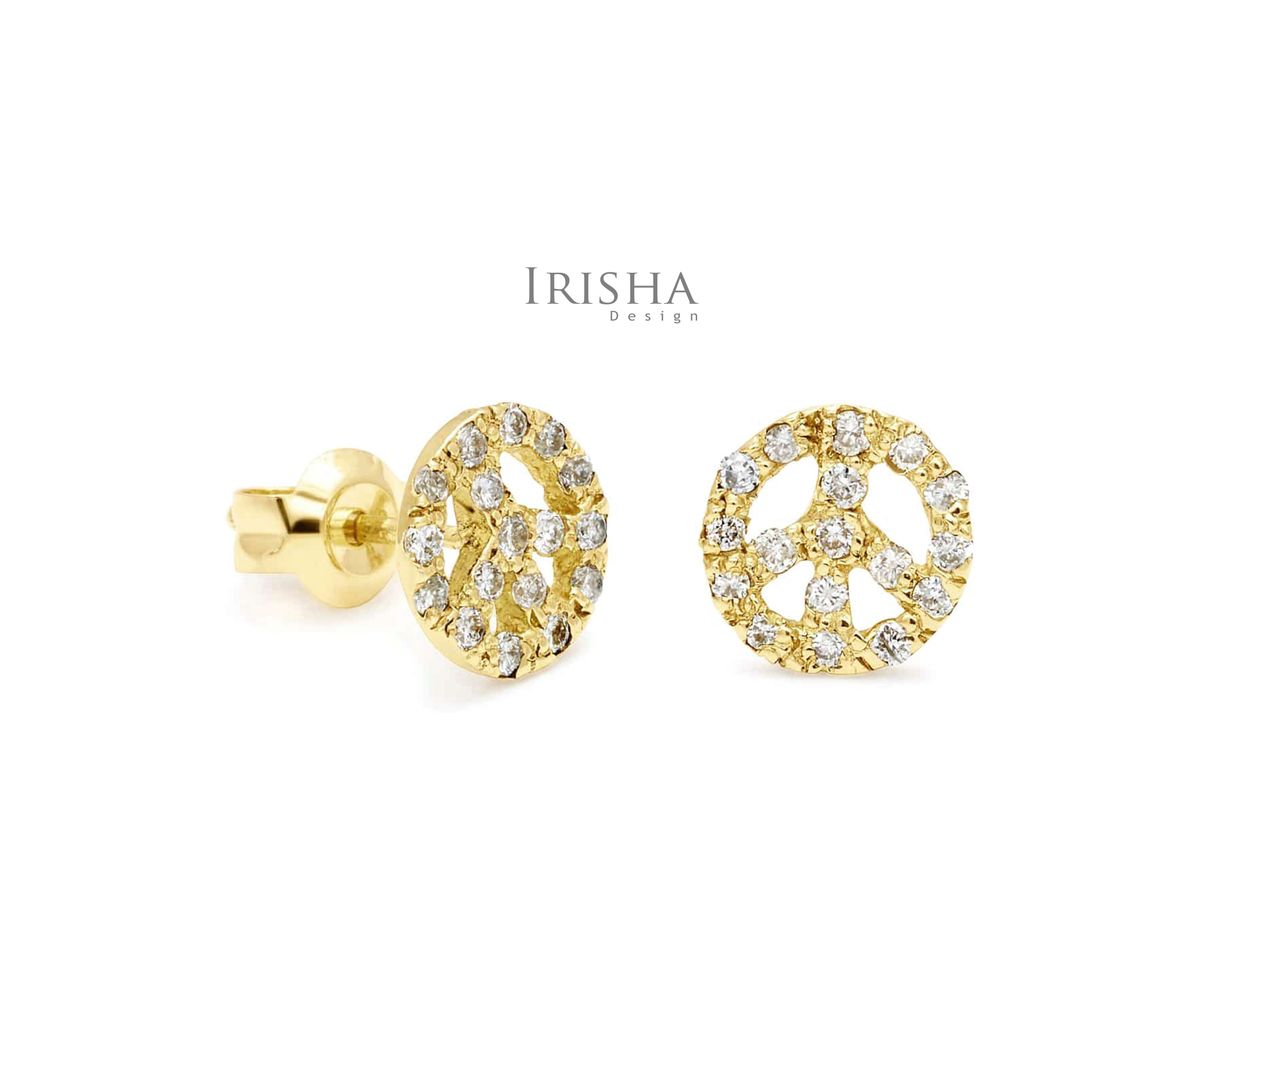 Thanksgiving Gift 0.34 Ct. Genuine Diamond Sign Of Peace Studs Earrings 14K Gold